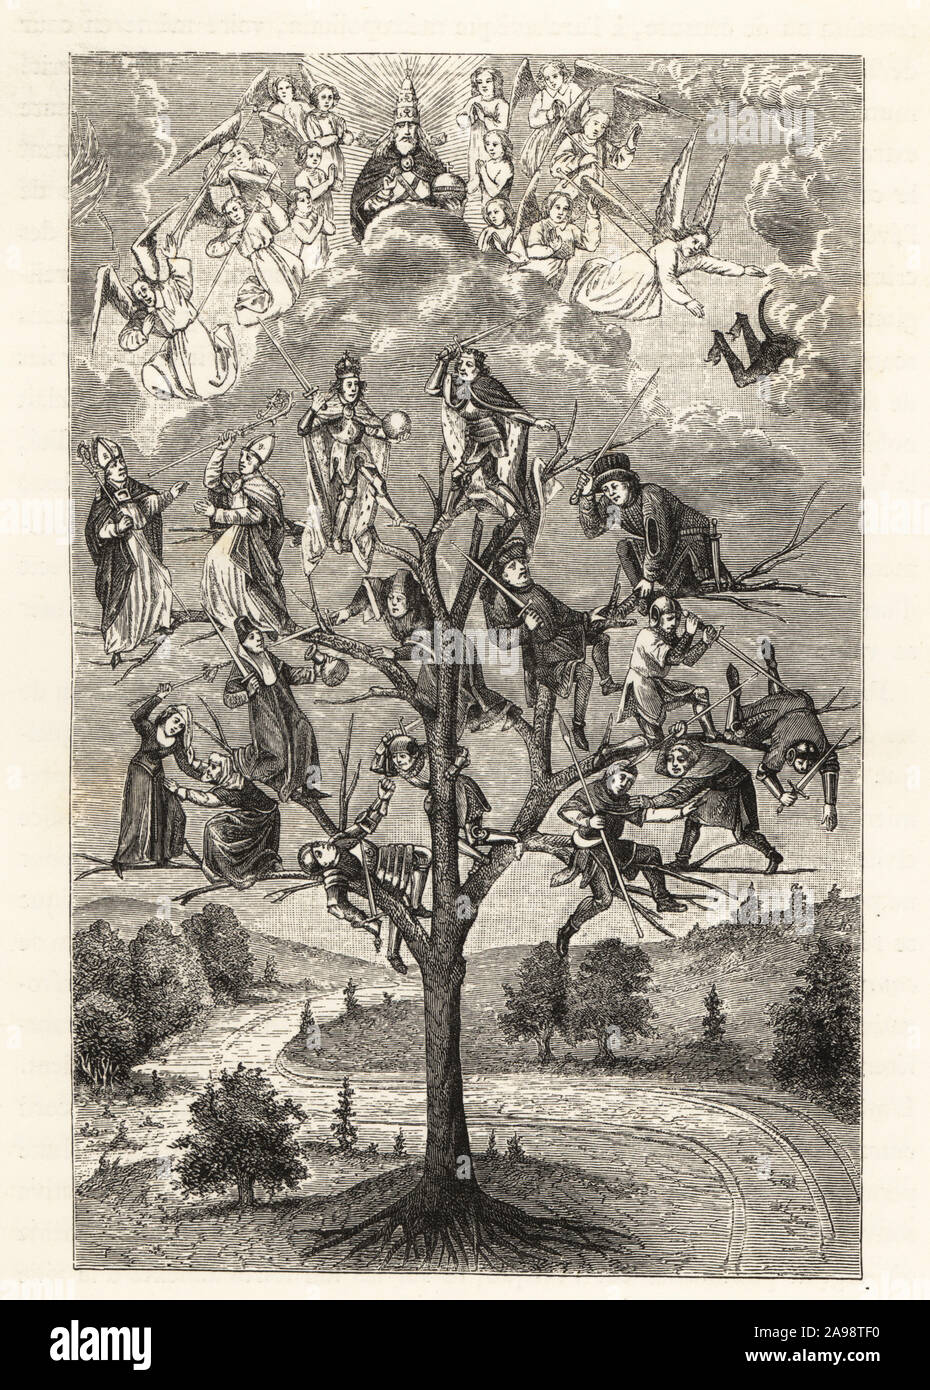 The tree of battles. Allegorical figure representing the discord among the various classes in feudal society. From the 15th century manuscript by Honore Bouet, L’arbre des batailles. Woodcut by Etienne Huyot and Jules Huyot after Honore Bouet from Paul Lacroix’s La Vie Militaire et Religieuse au Moyen Age et a l’Epoque de la Renaissance, Military and Religious Life in the Middle Ages and the Renaissance, Paris, 1873. Stock Photo